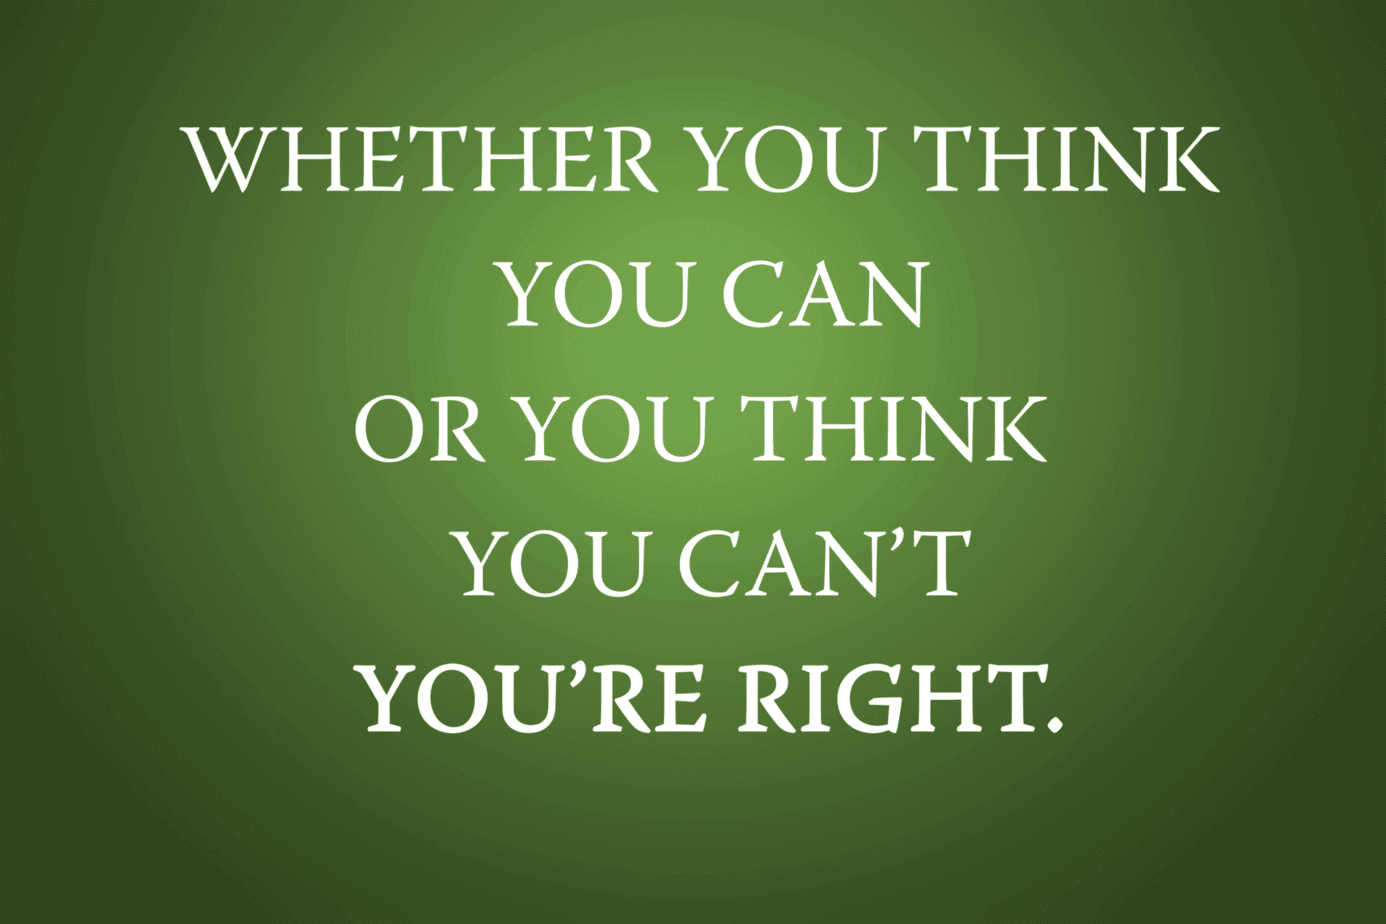 Whether you think you can or you think you can't, you're right.